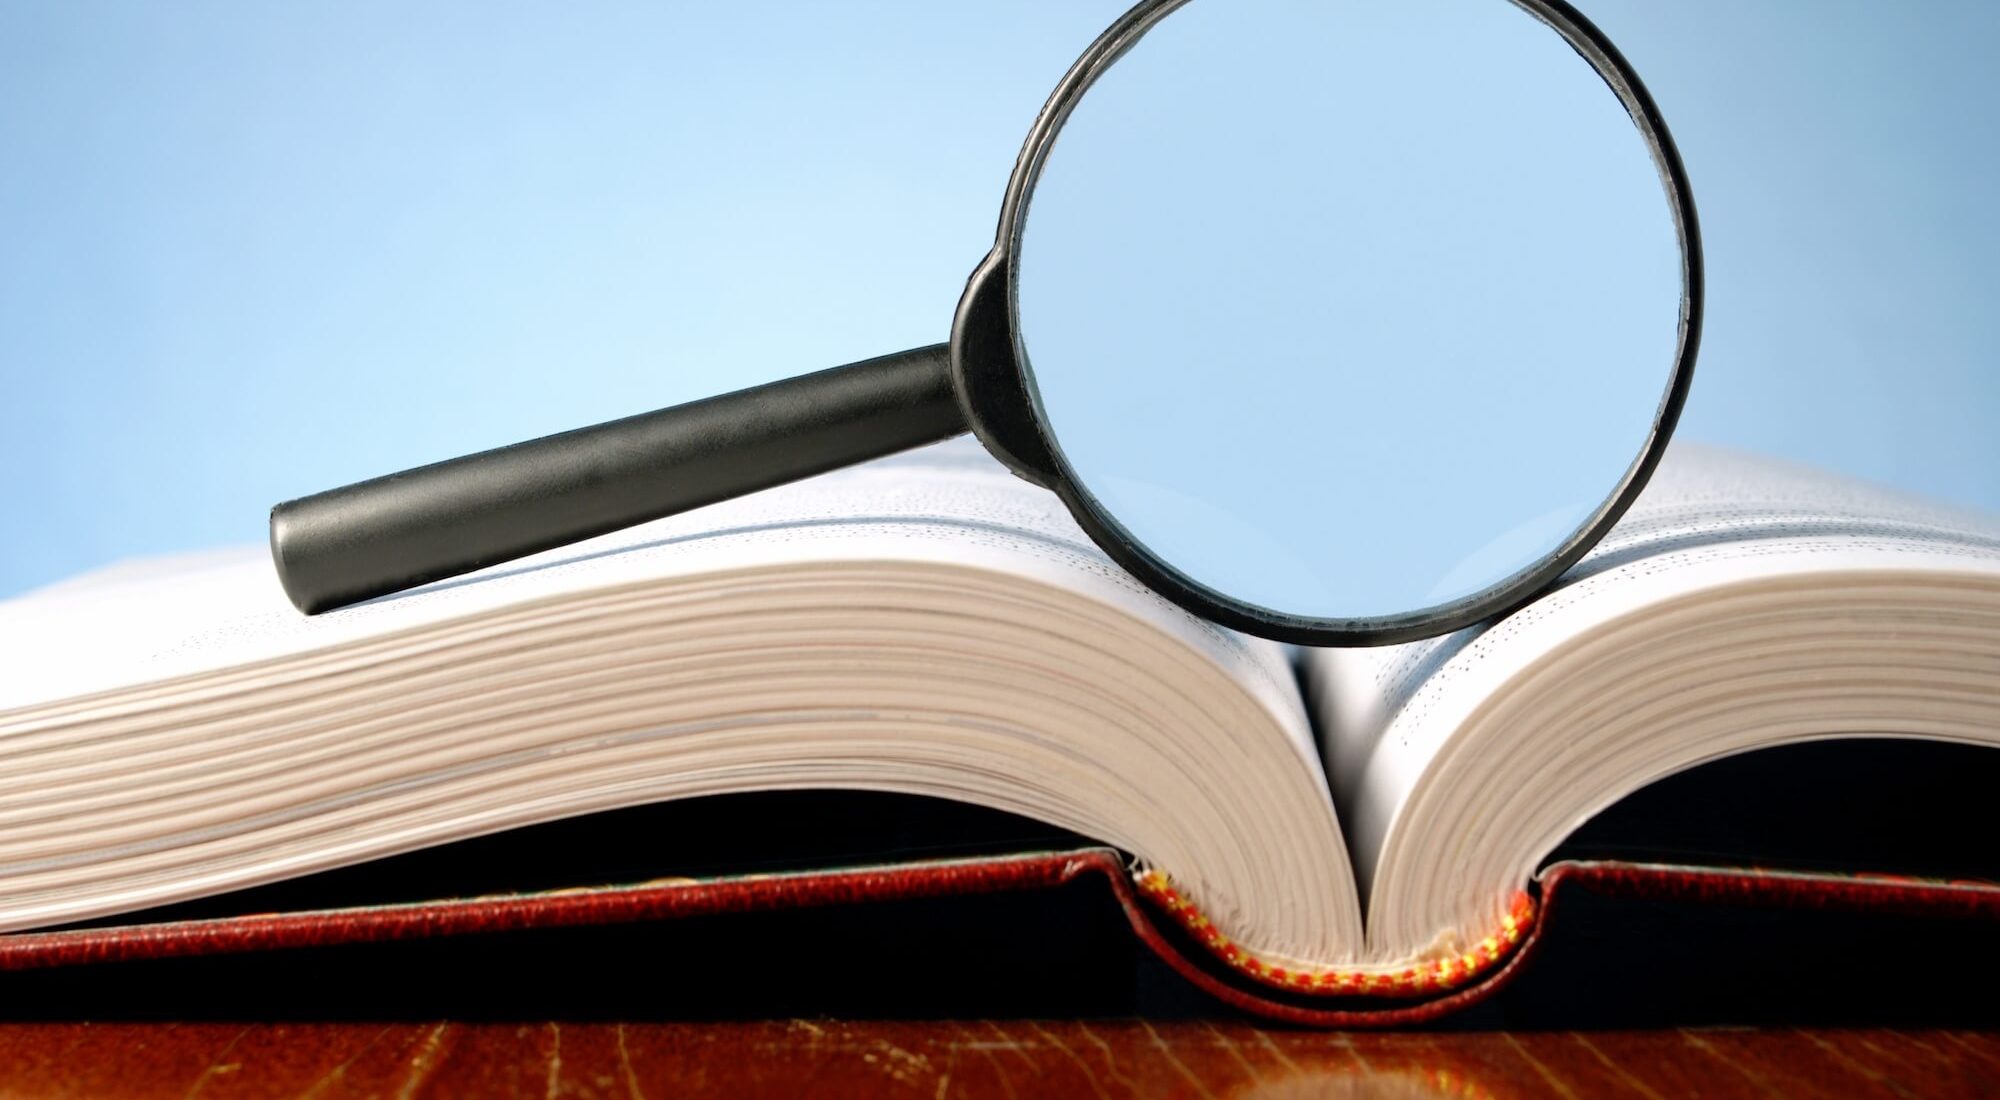 Magnifying glass on book